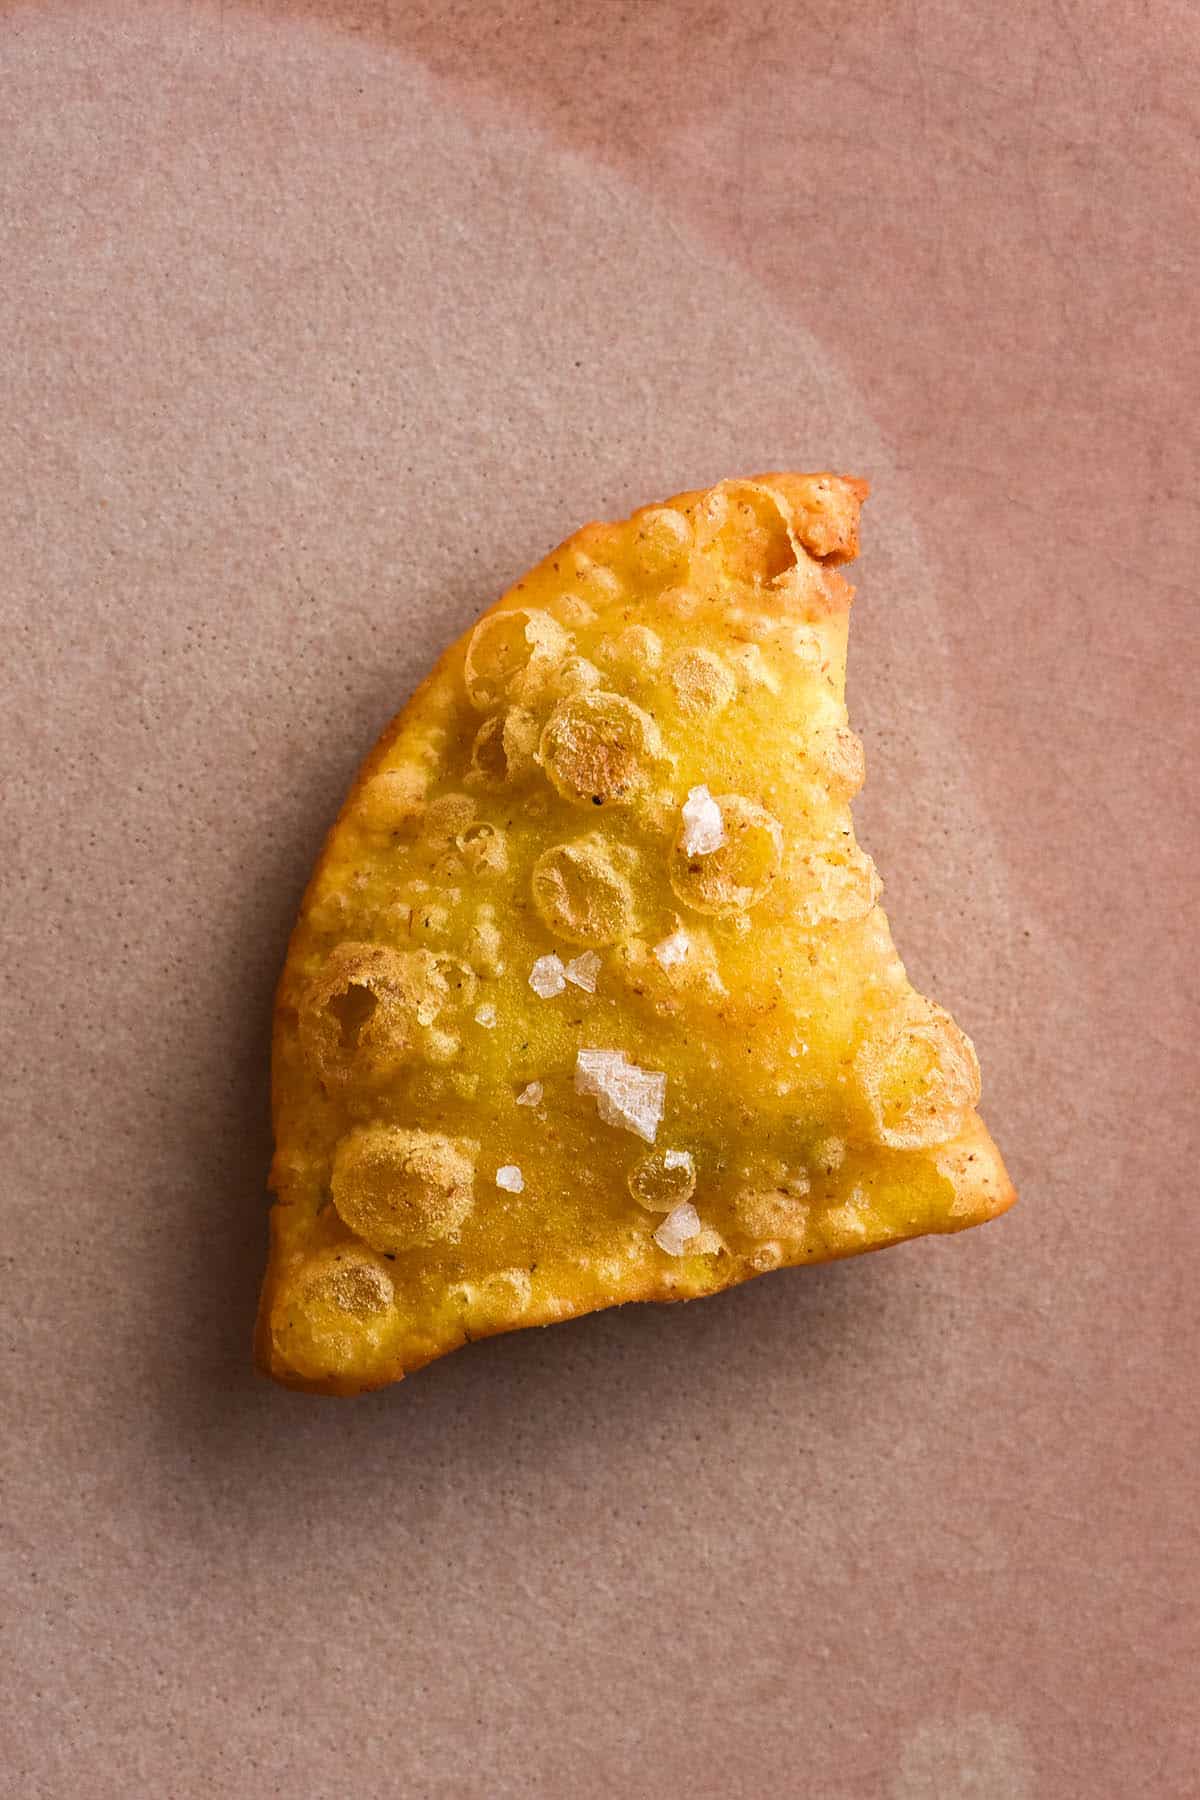 An aerial close up of a golden brown gluten free samosa topped with sea salt flakes. The samosa sits on a textured pale pink ceramic plate.